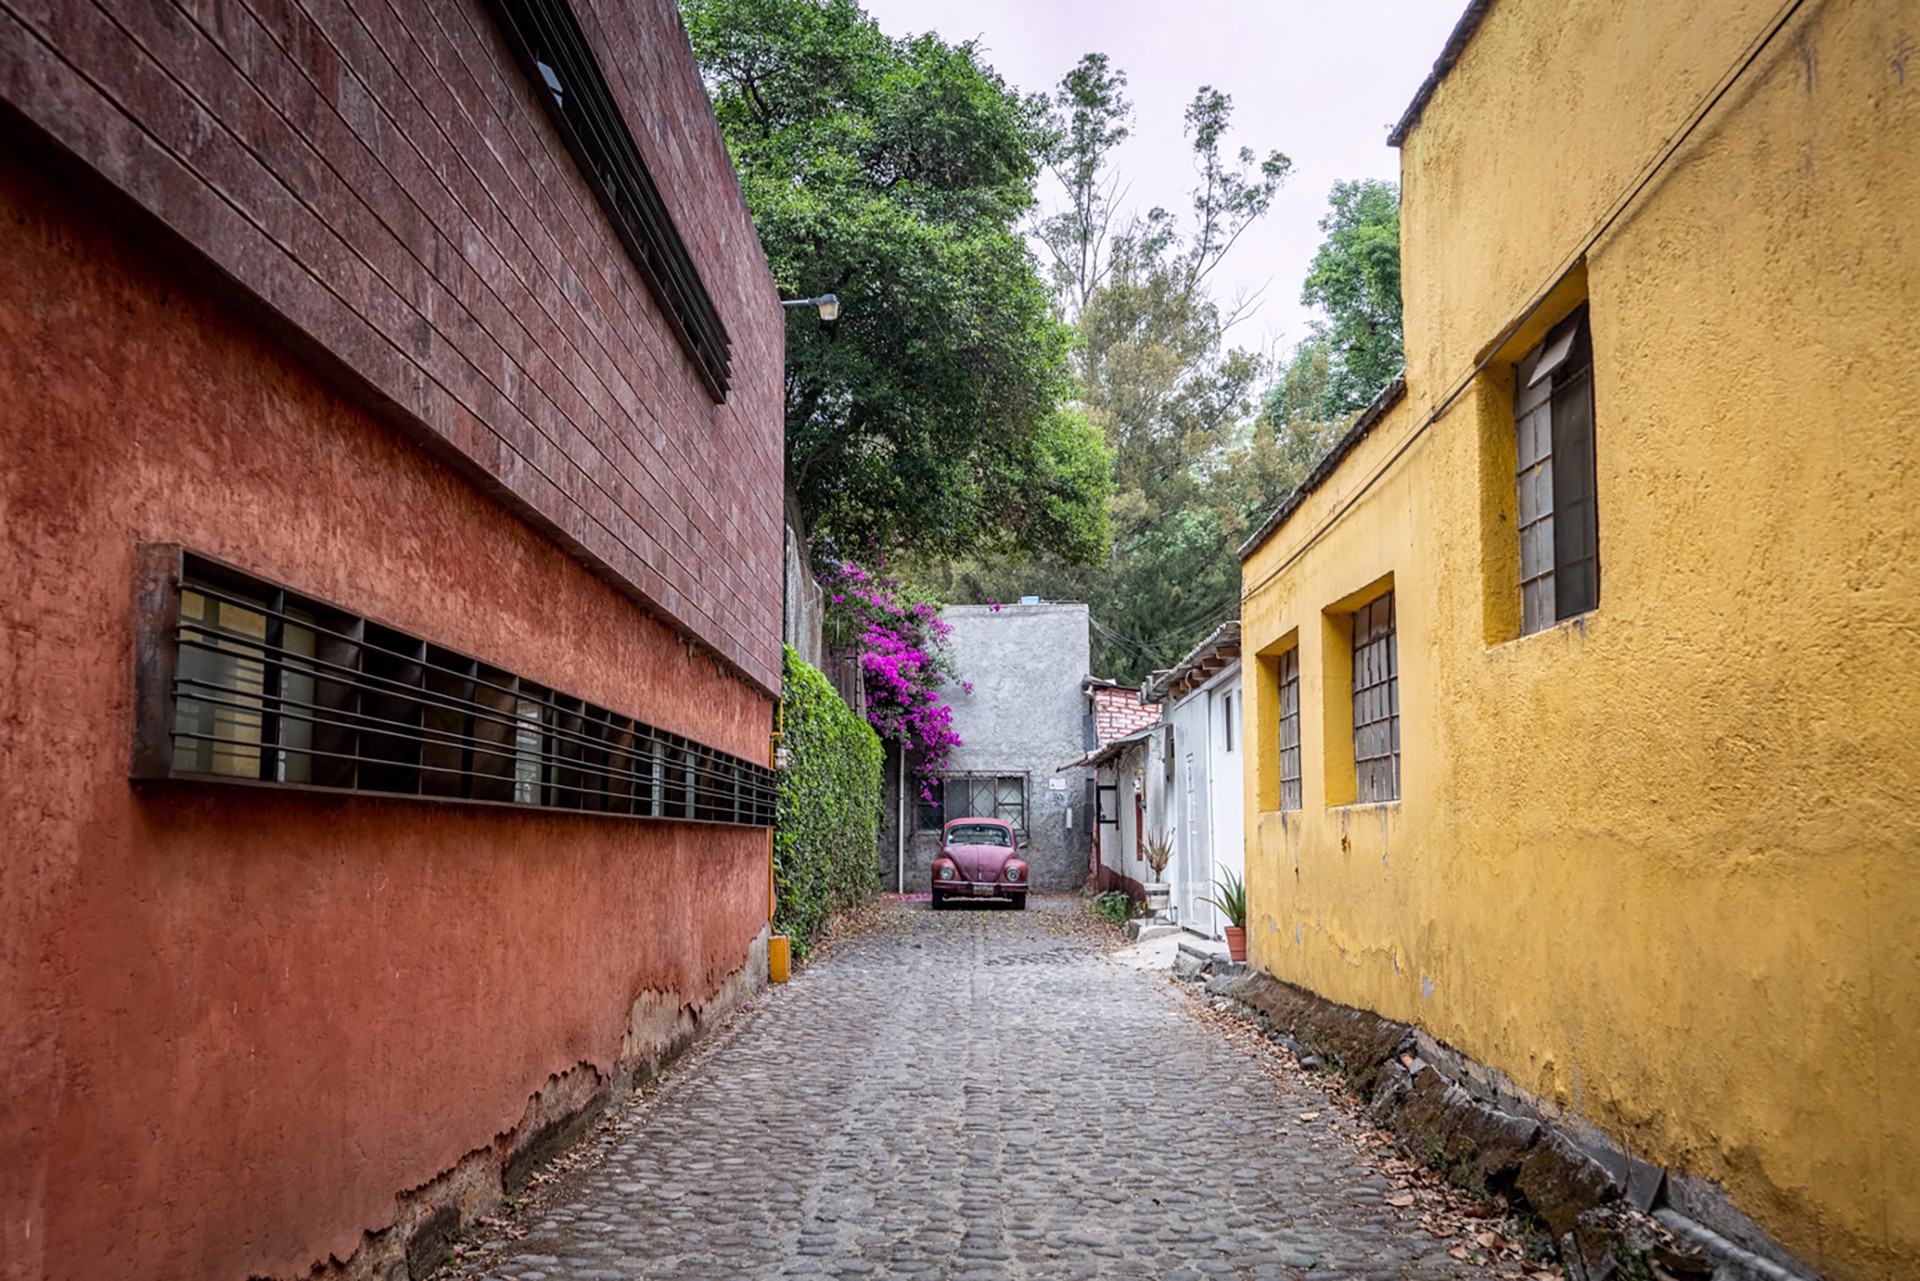 Alley - Mexico City, Mexico by Kevin Greenblat